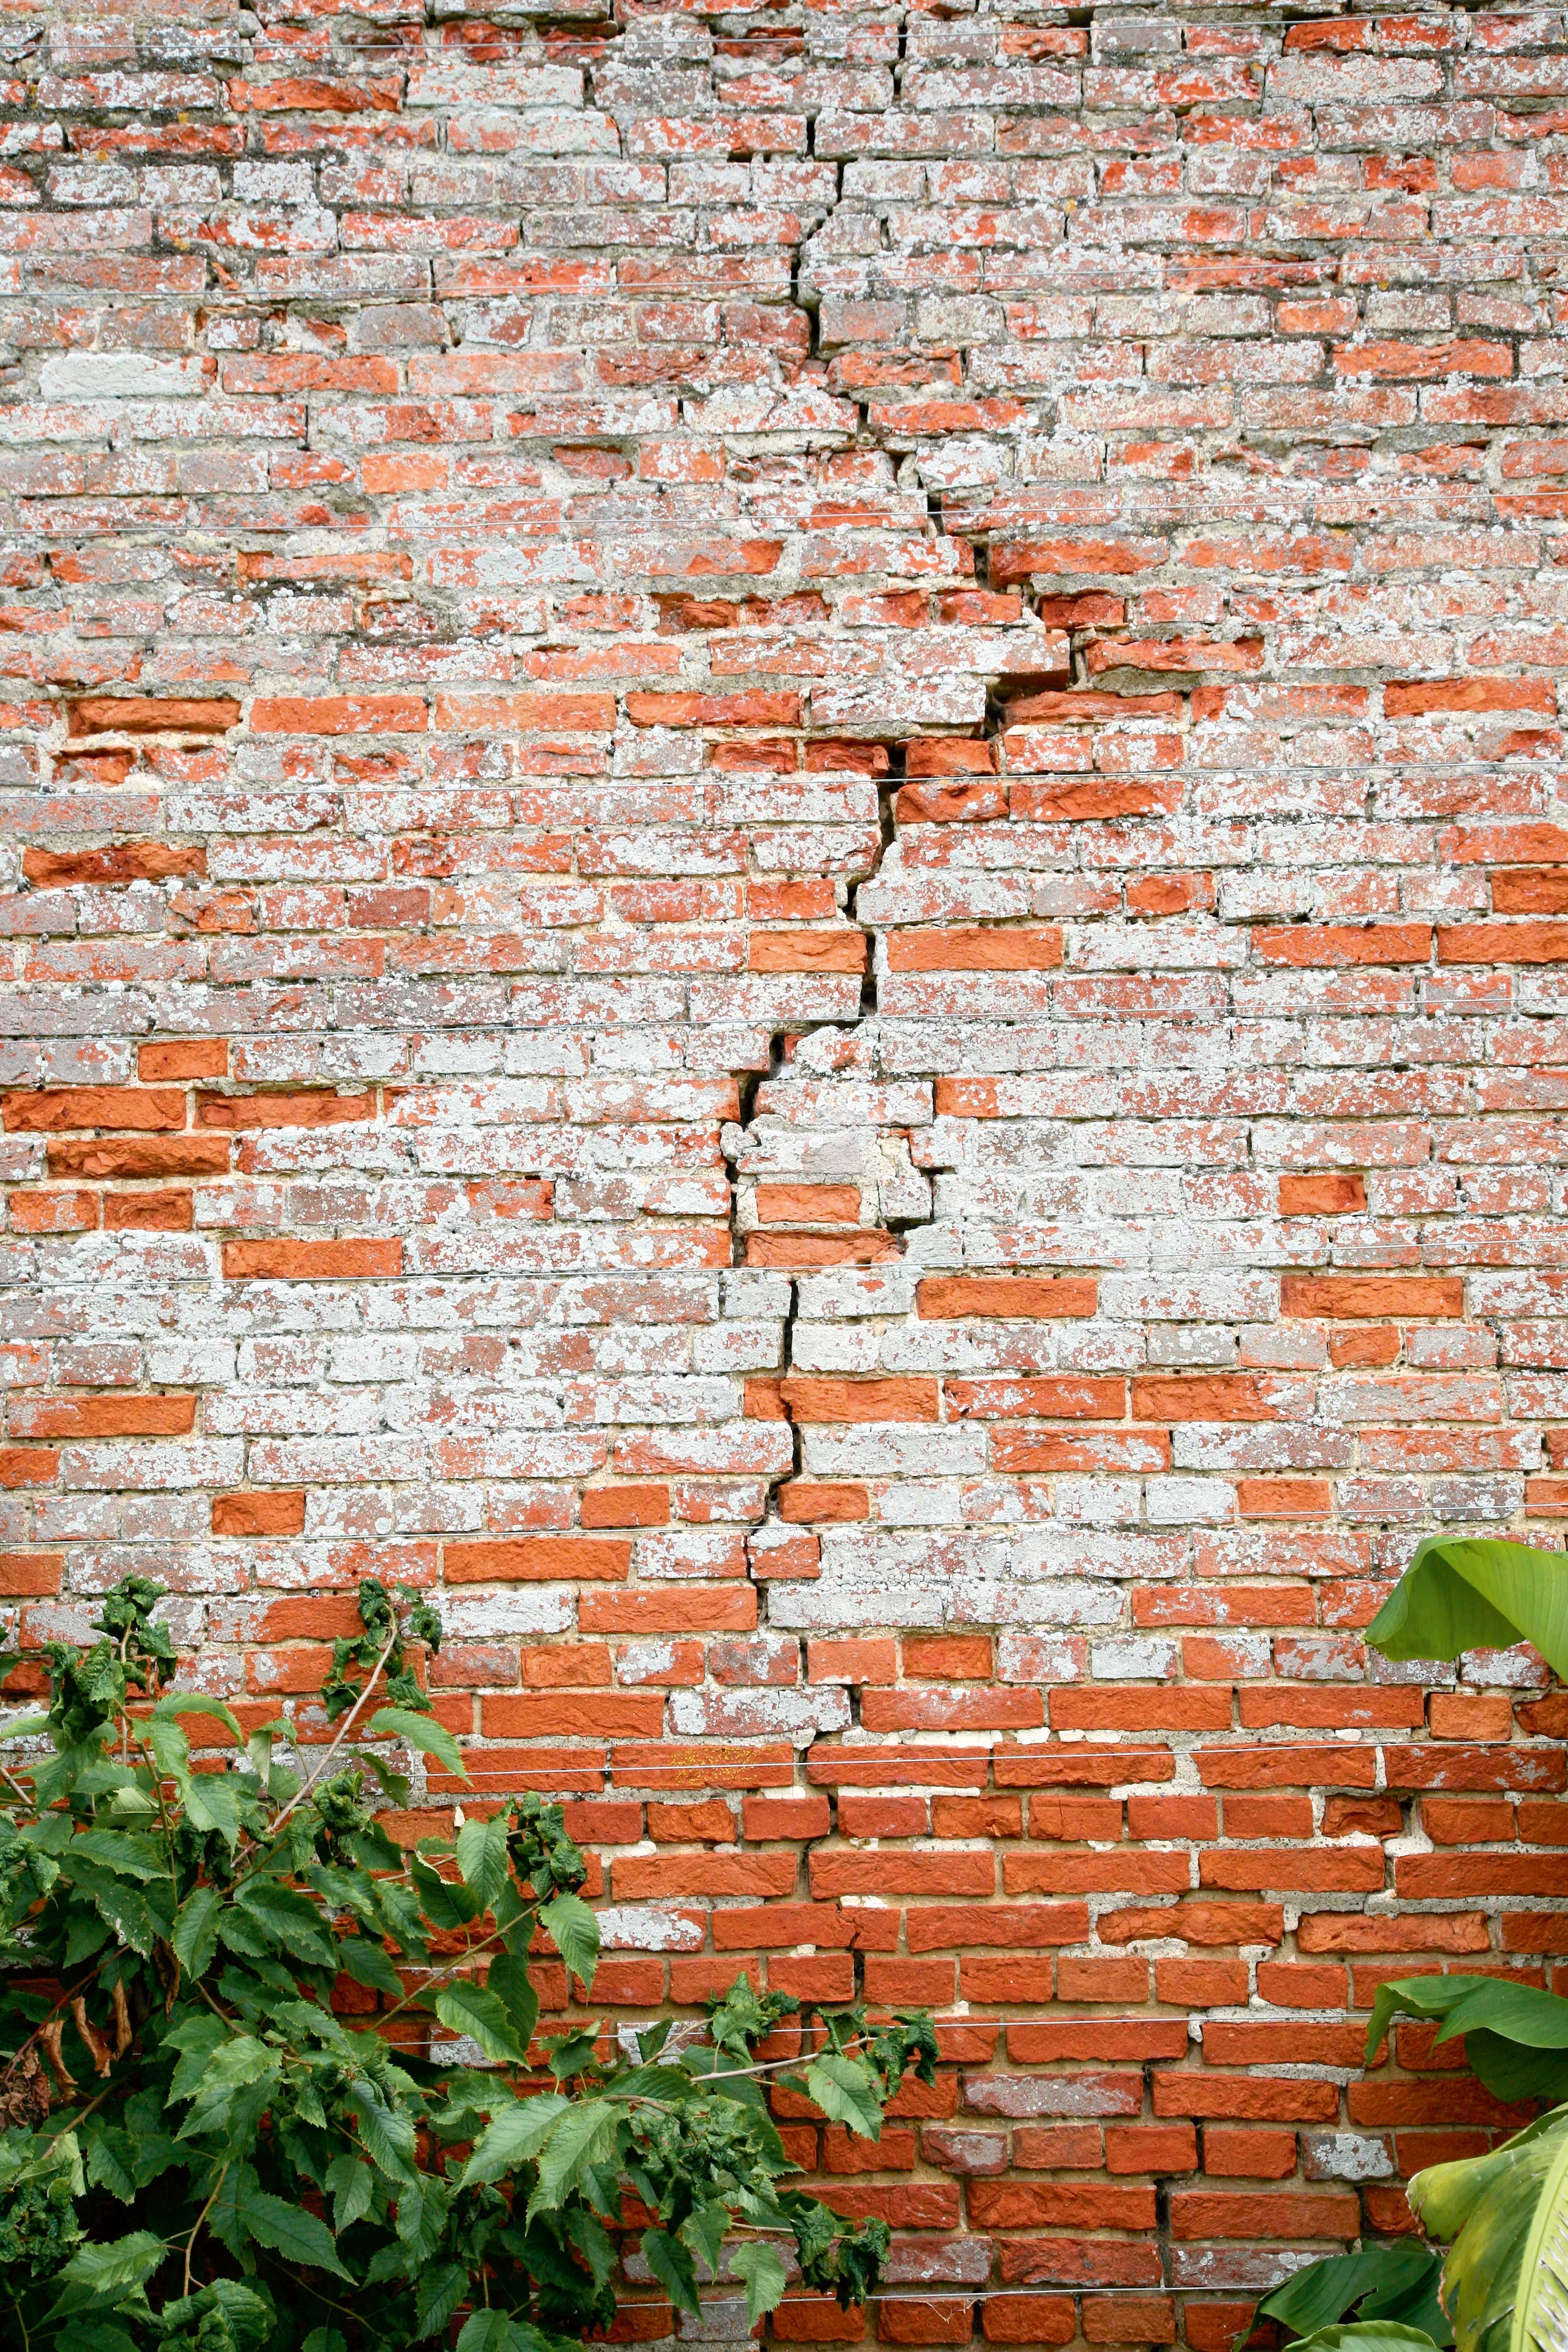 How to deal with cracks in walls and structural problems in old